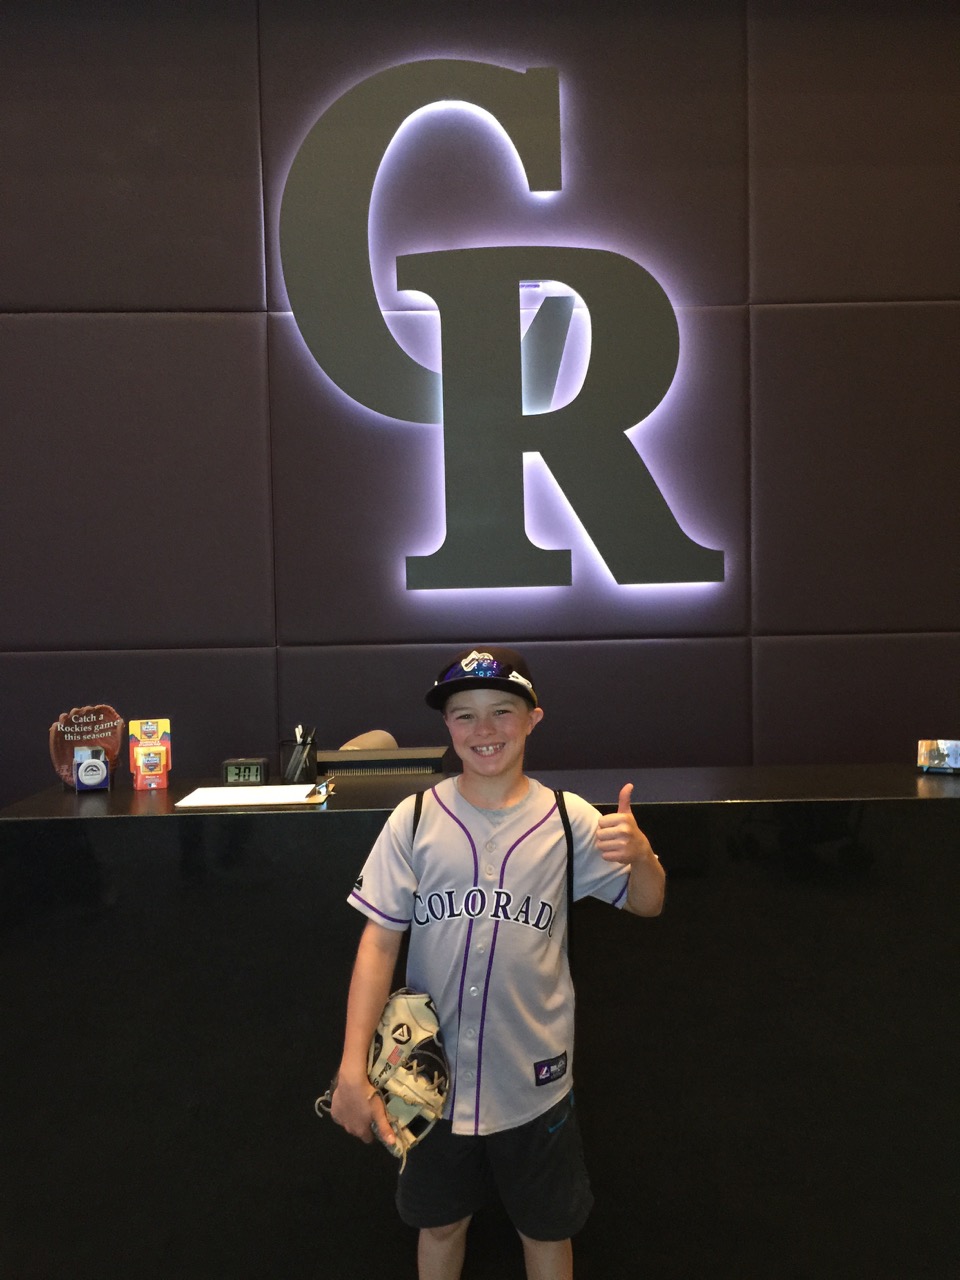 Ethan at the Colorado Rockies spring training camp